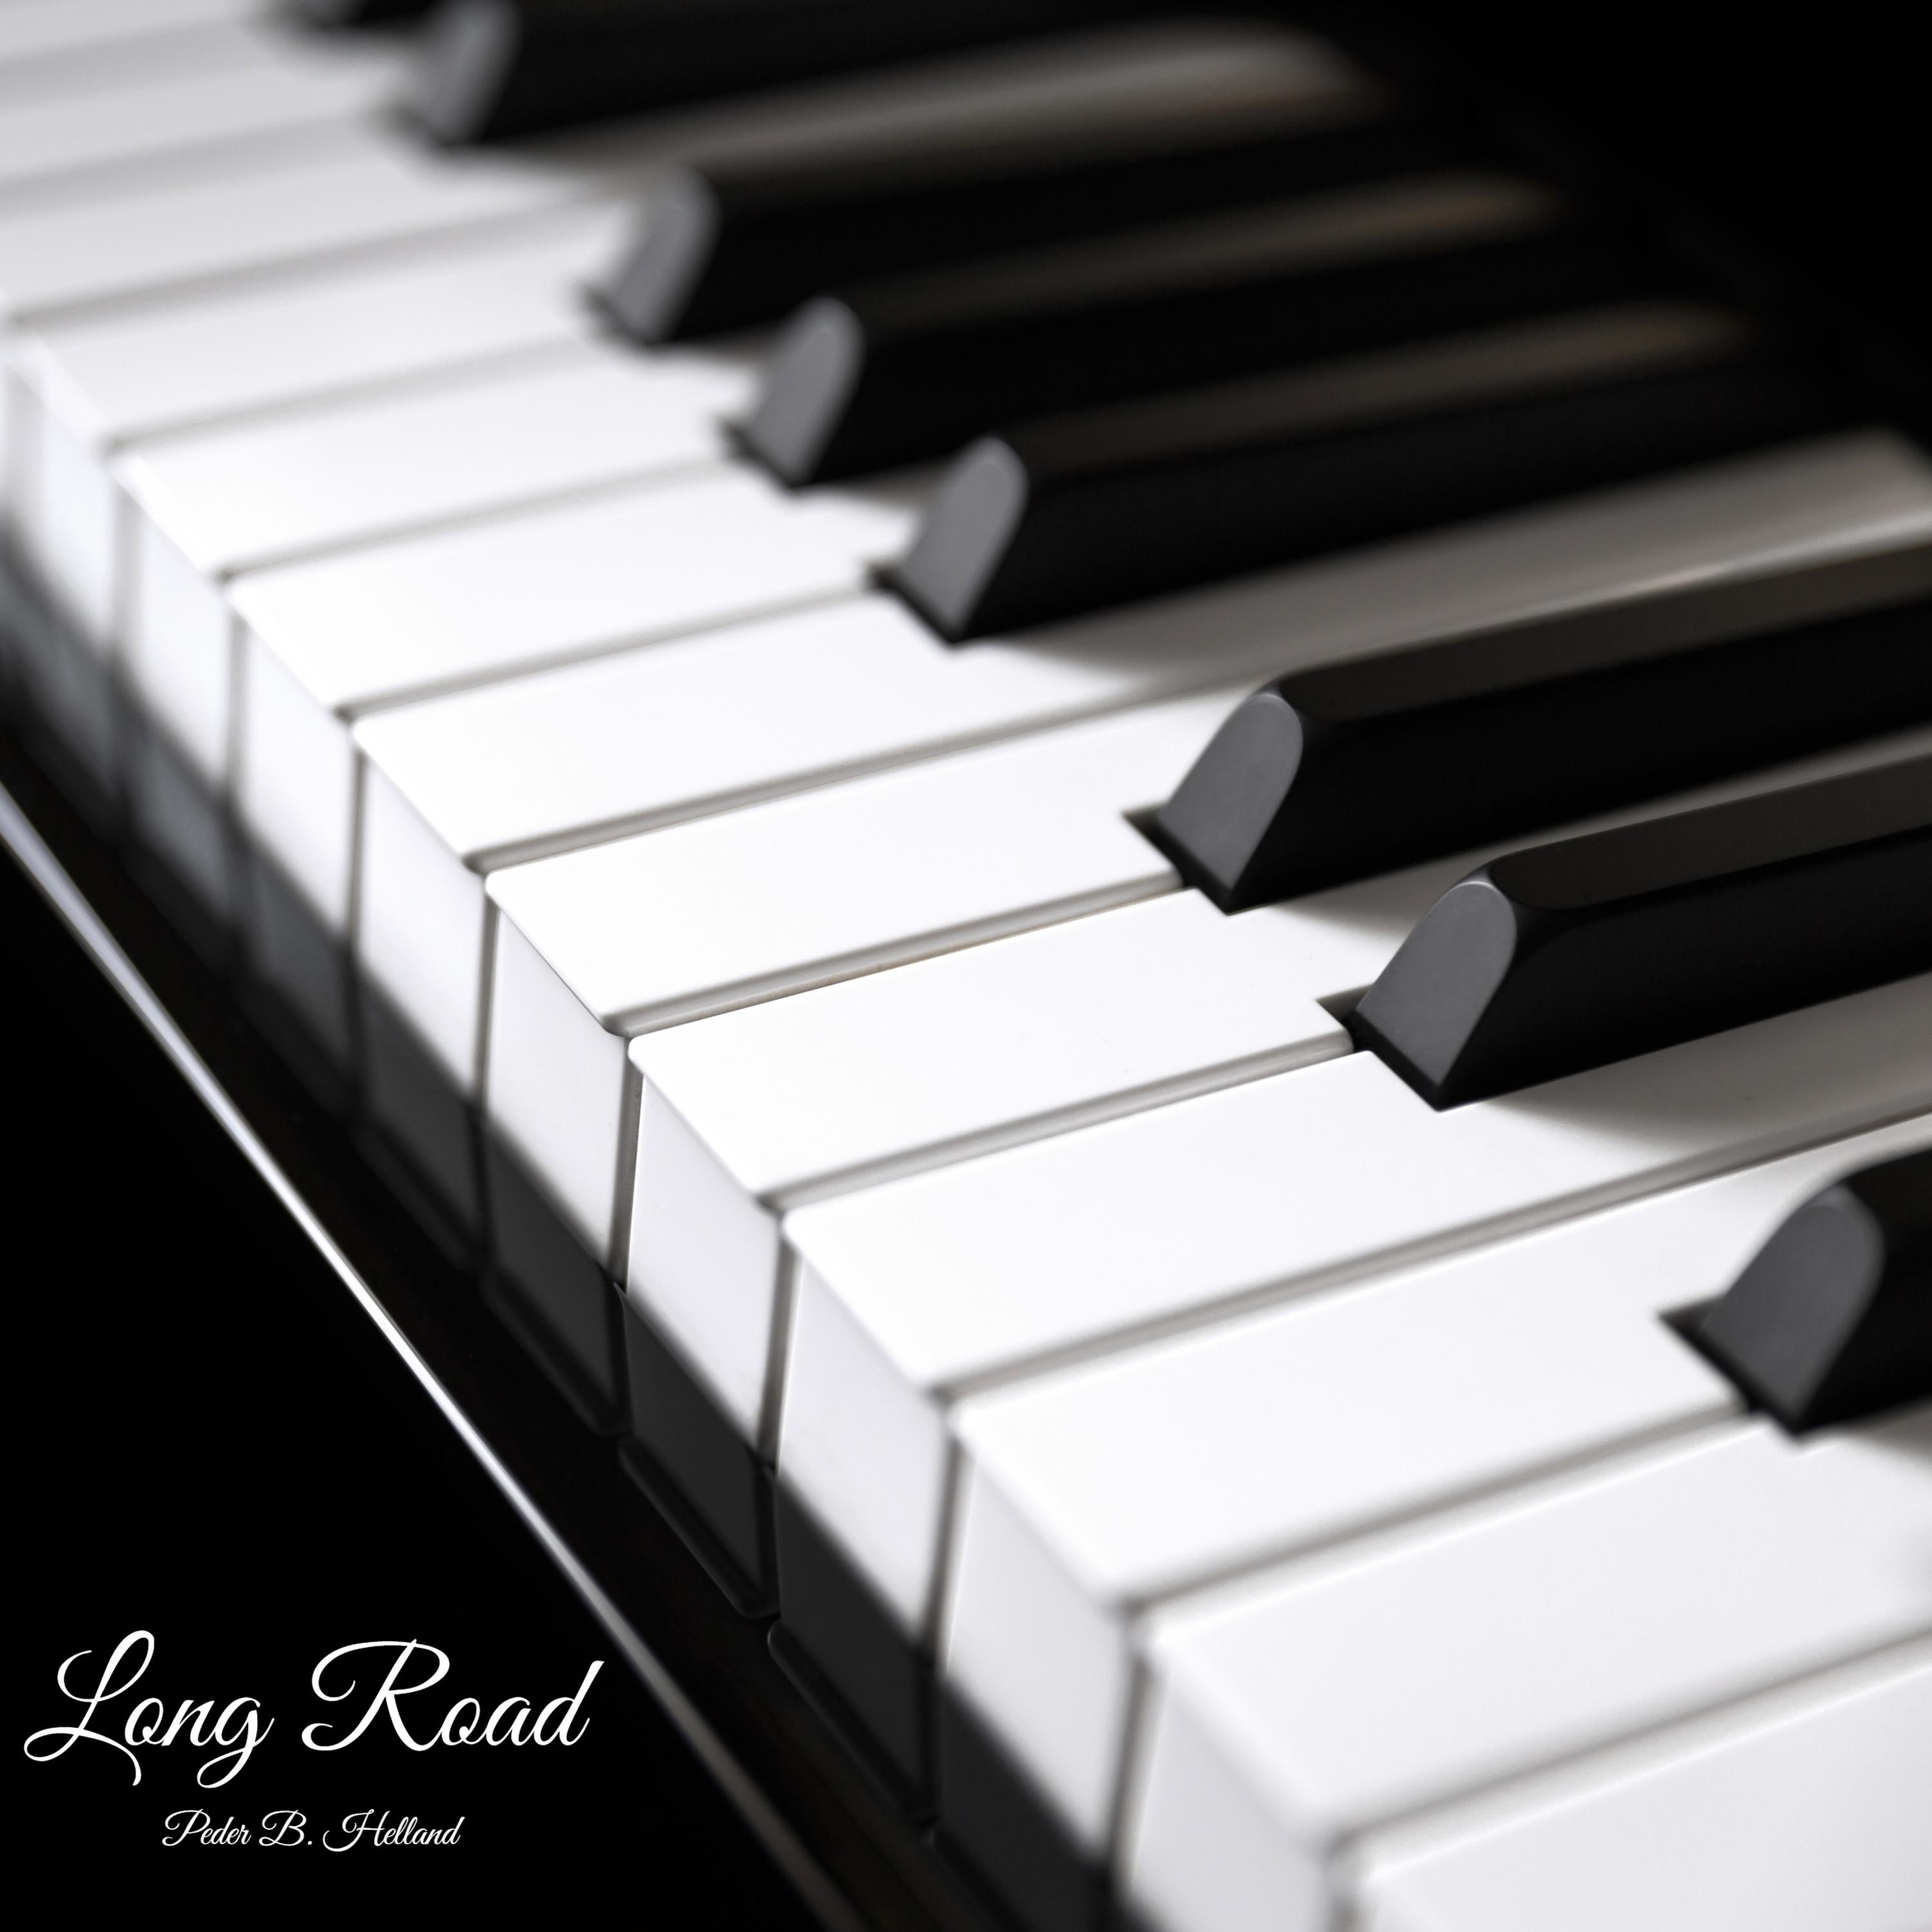 Cover art for the single Long Road (Piano Version) by Peder B. Helland